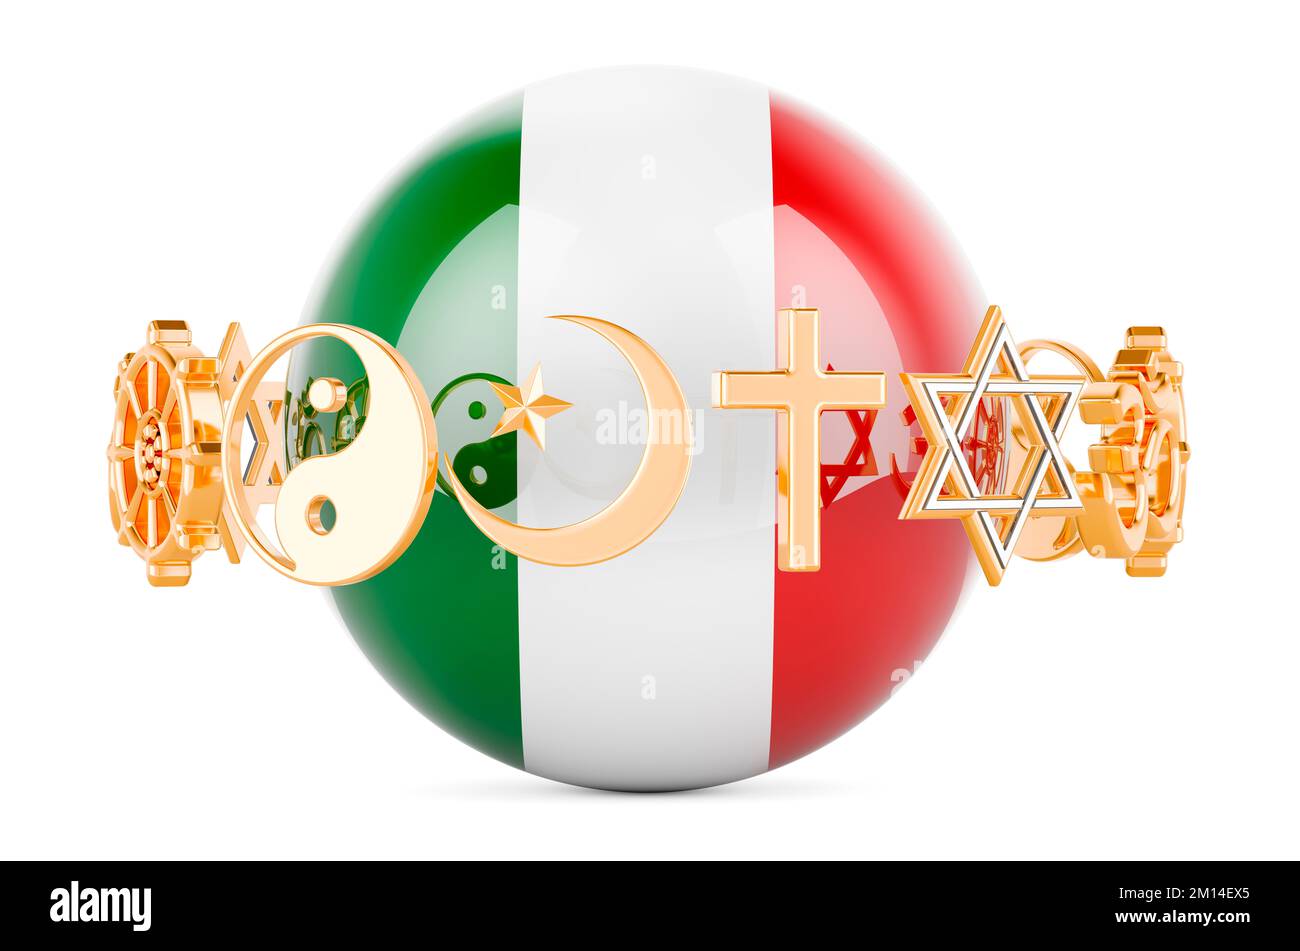 Italian flag painted on sphere with religions symbols around, 3D rendering isolated on white background Stock Photo